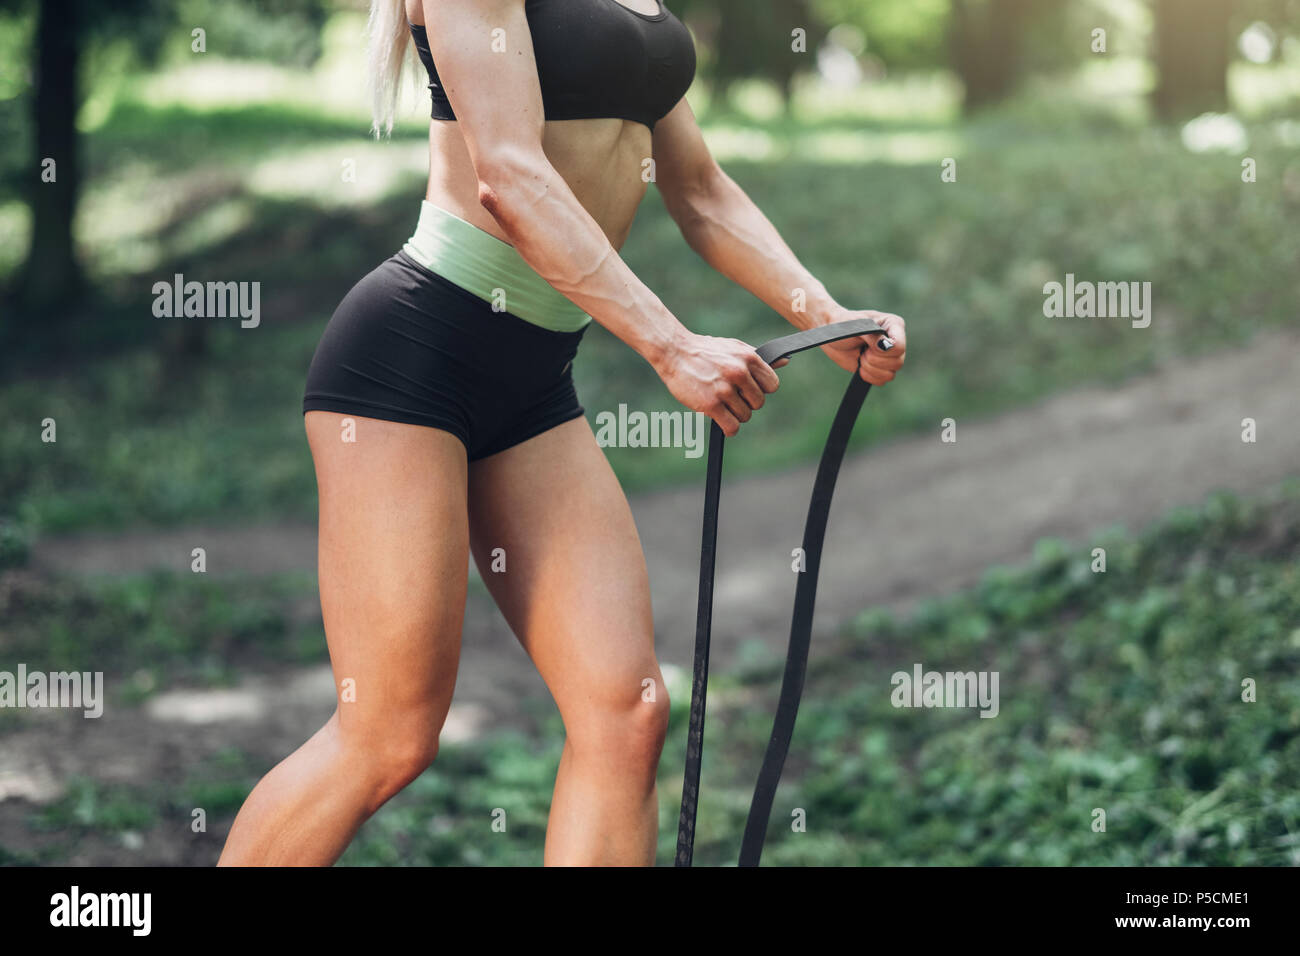 Fitness Woman Doing Training Workout Outdoor in Summer Morning Park. Concept Sport Healthy Lifestyle. Stock Photo